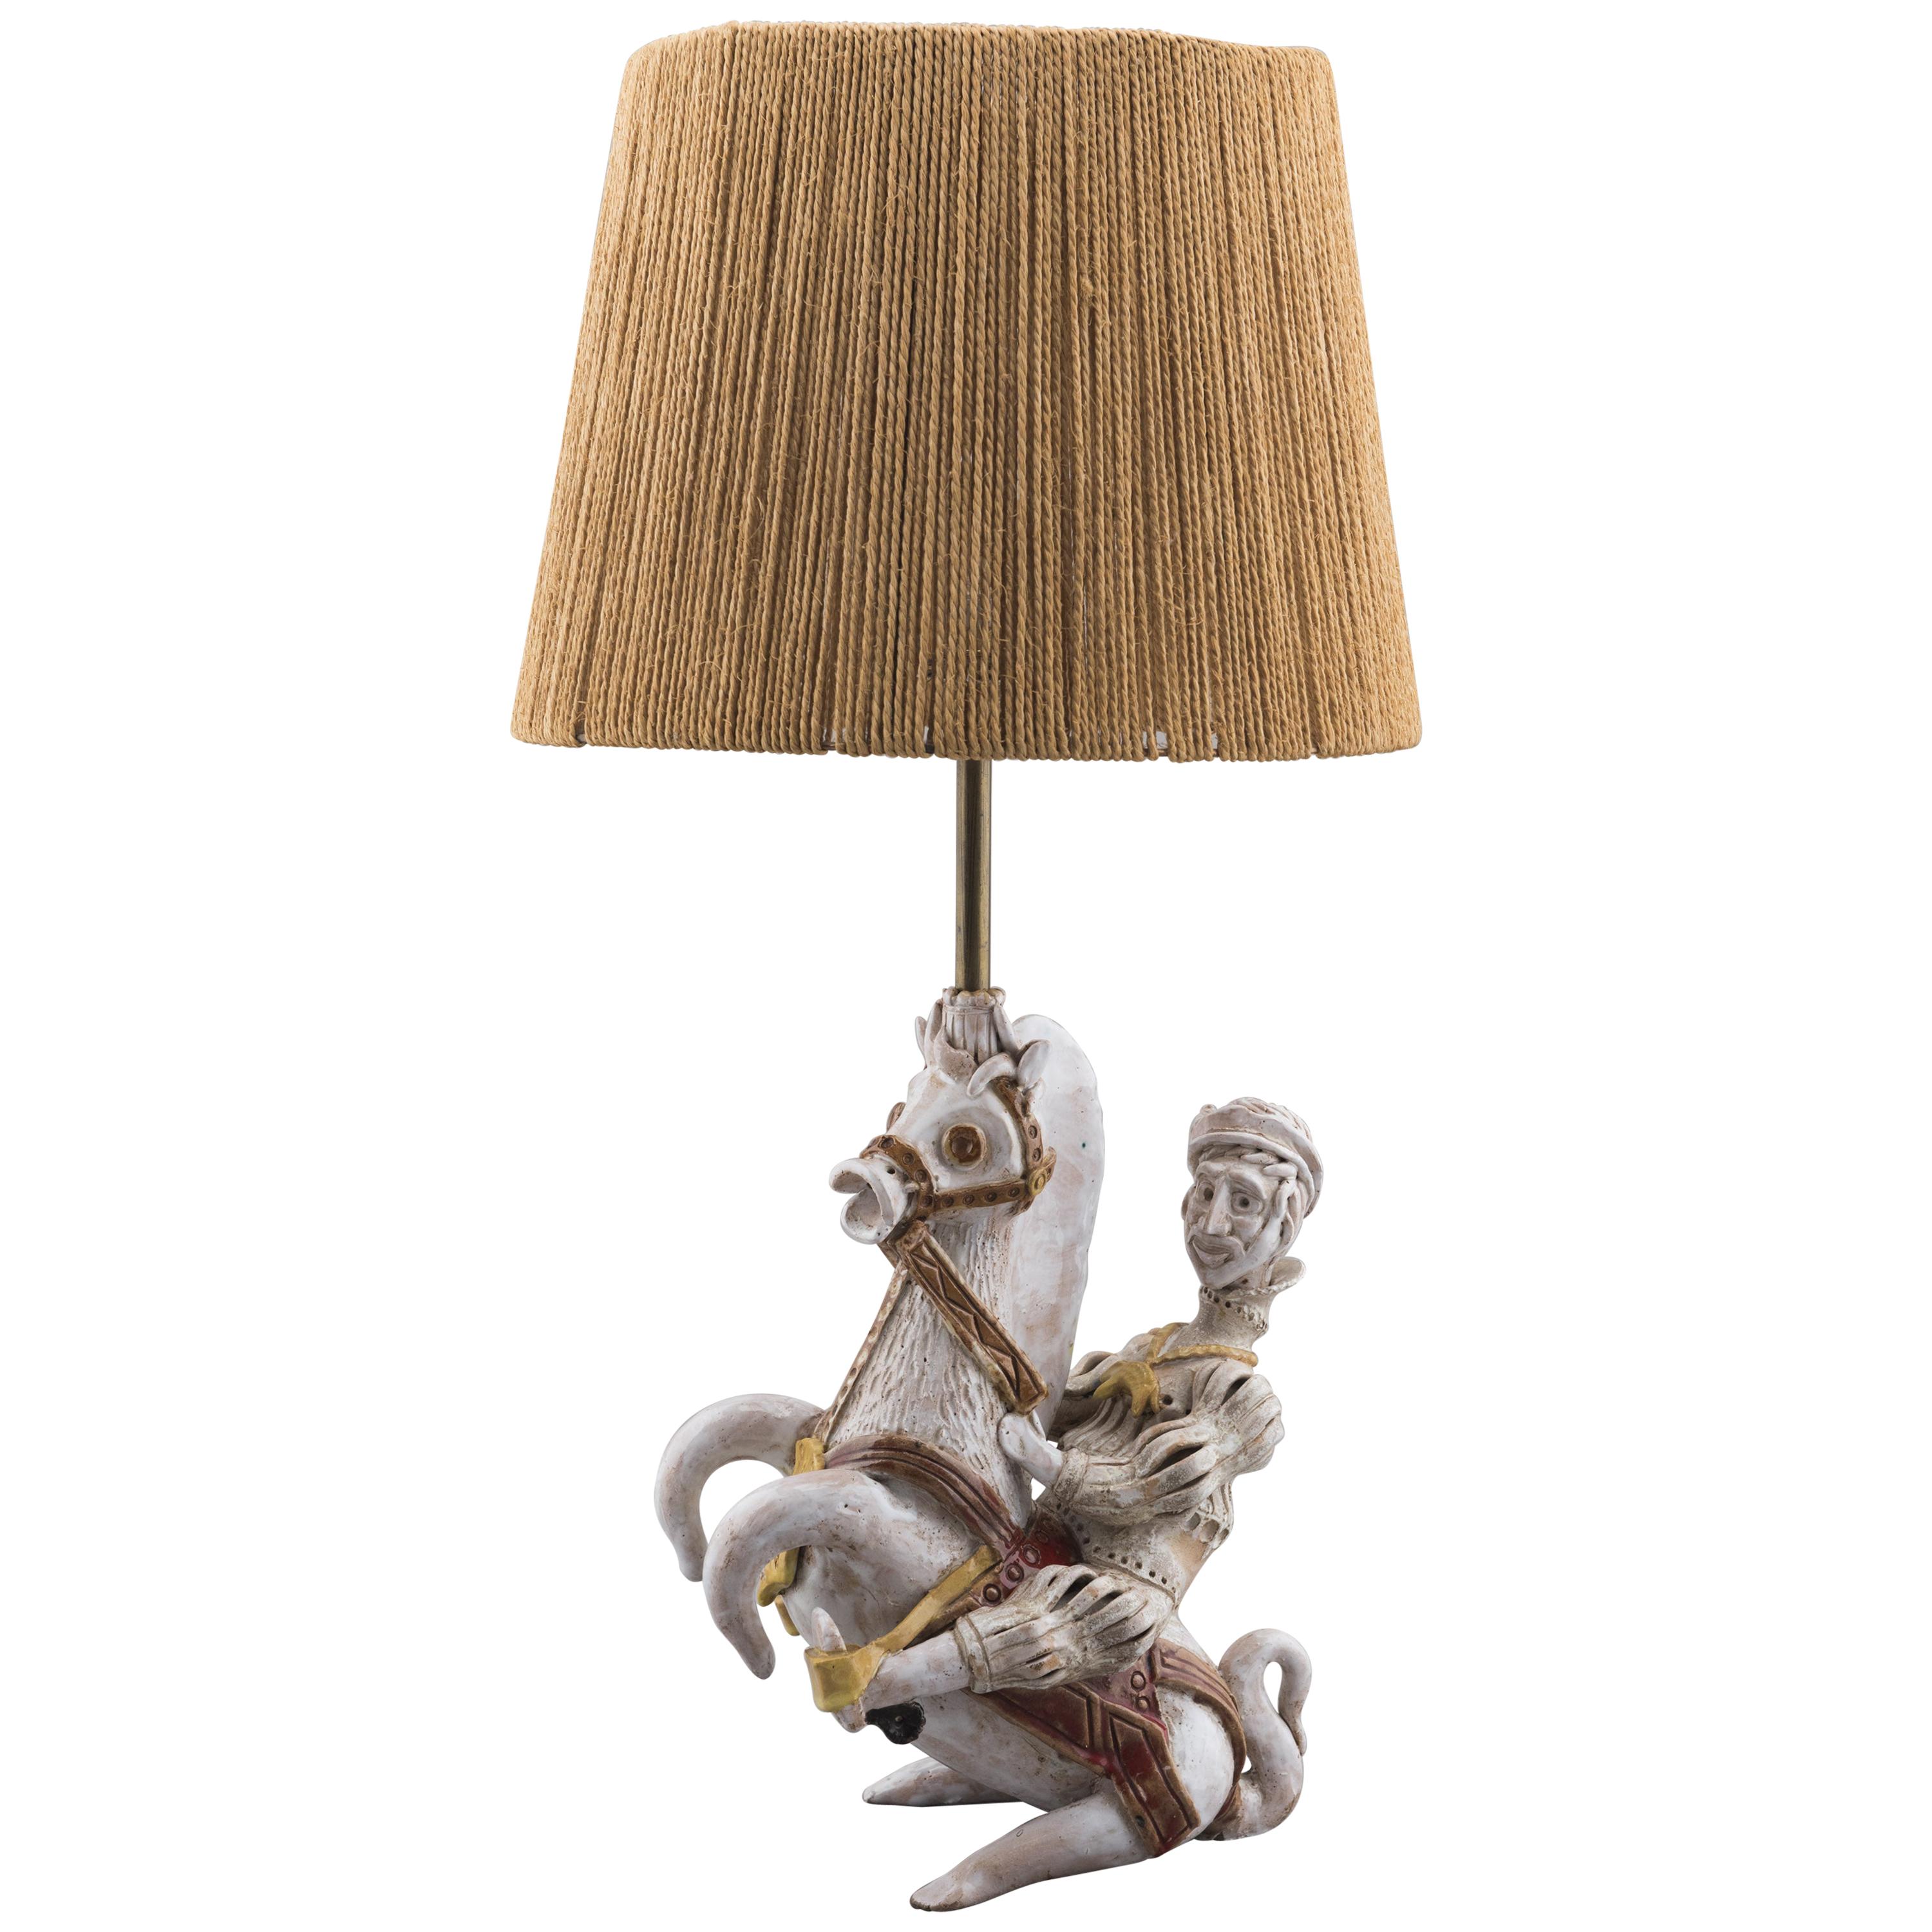 Ceramic Lamp "the Knight" by André Marchal, 1950s, Vallauris